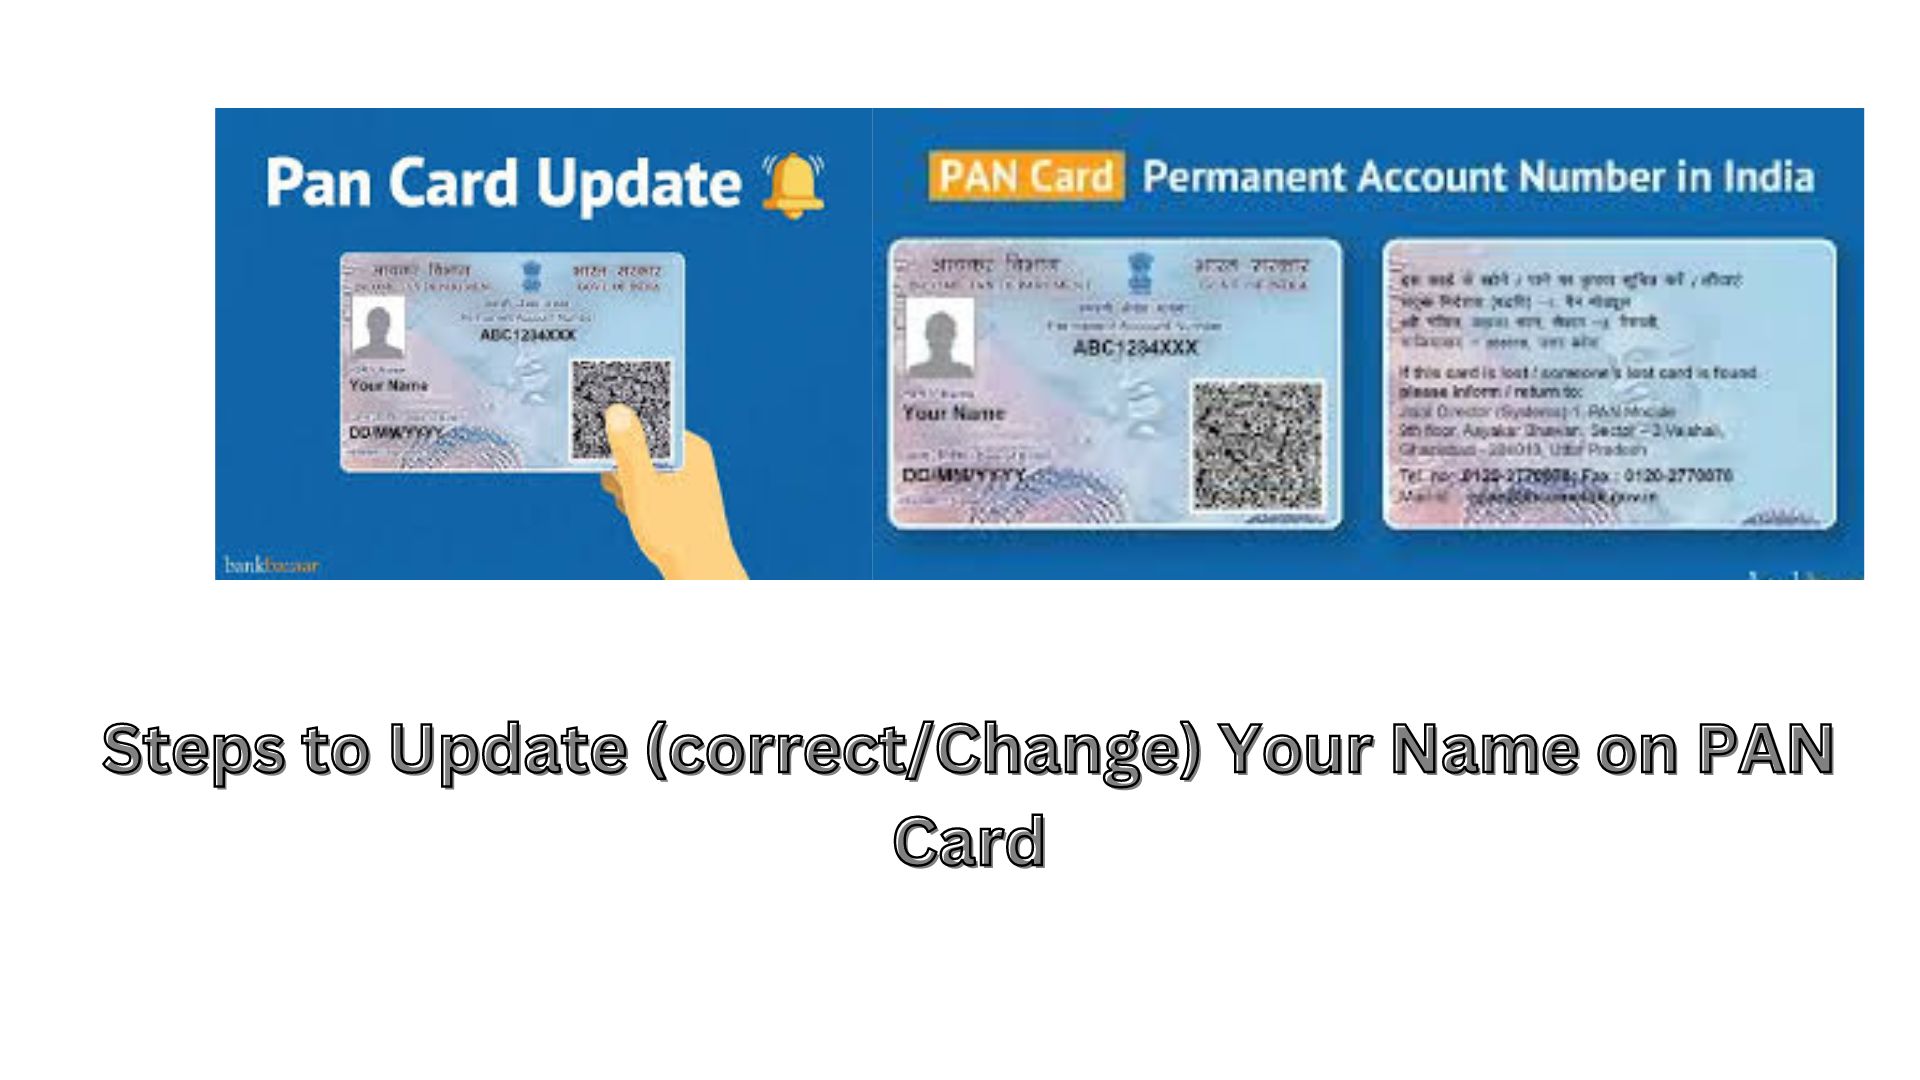 Steps to Update (correct/Change) Your Name on PAN Card